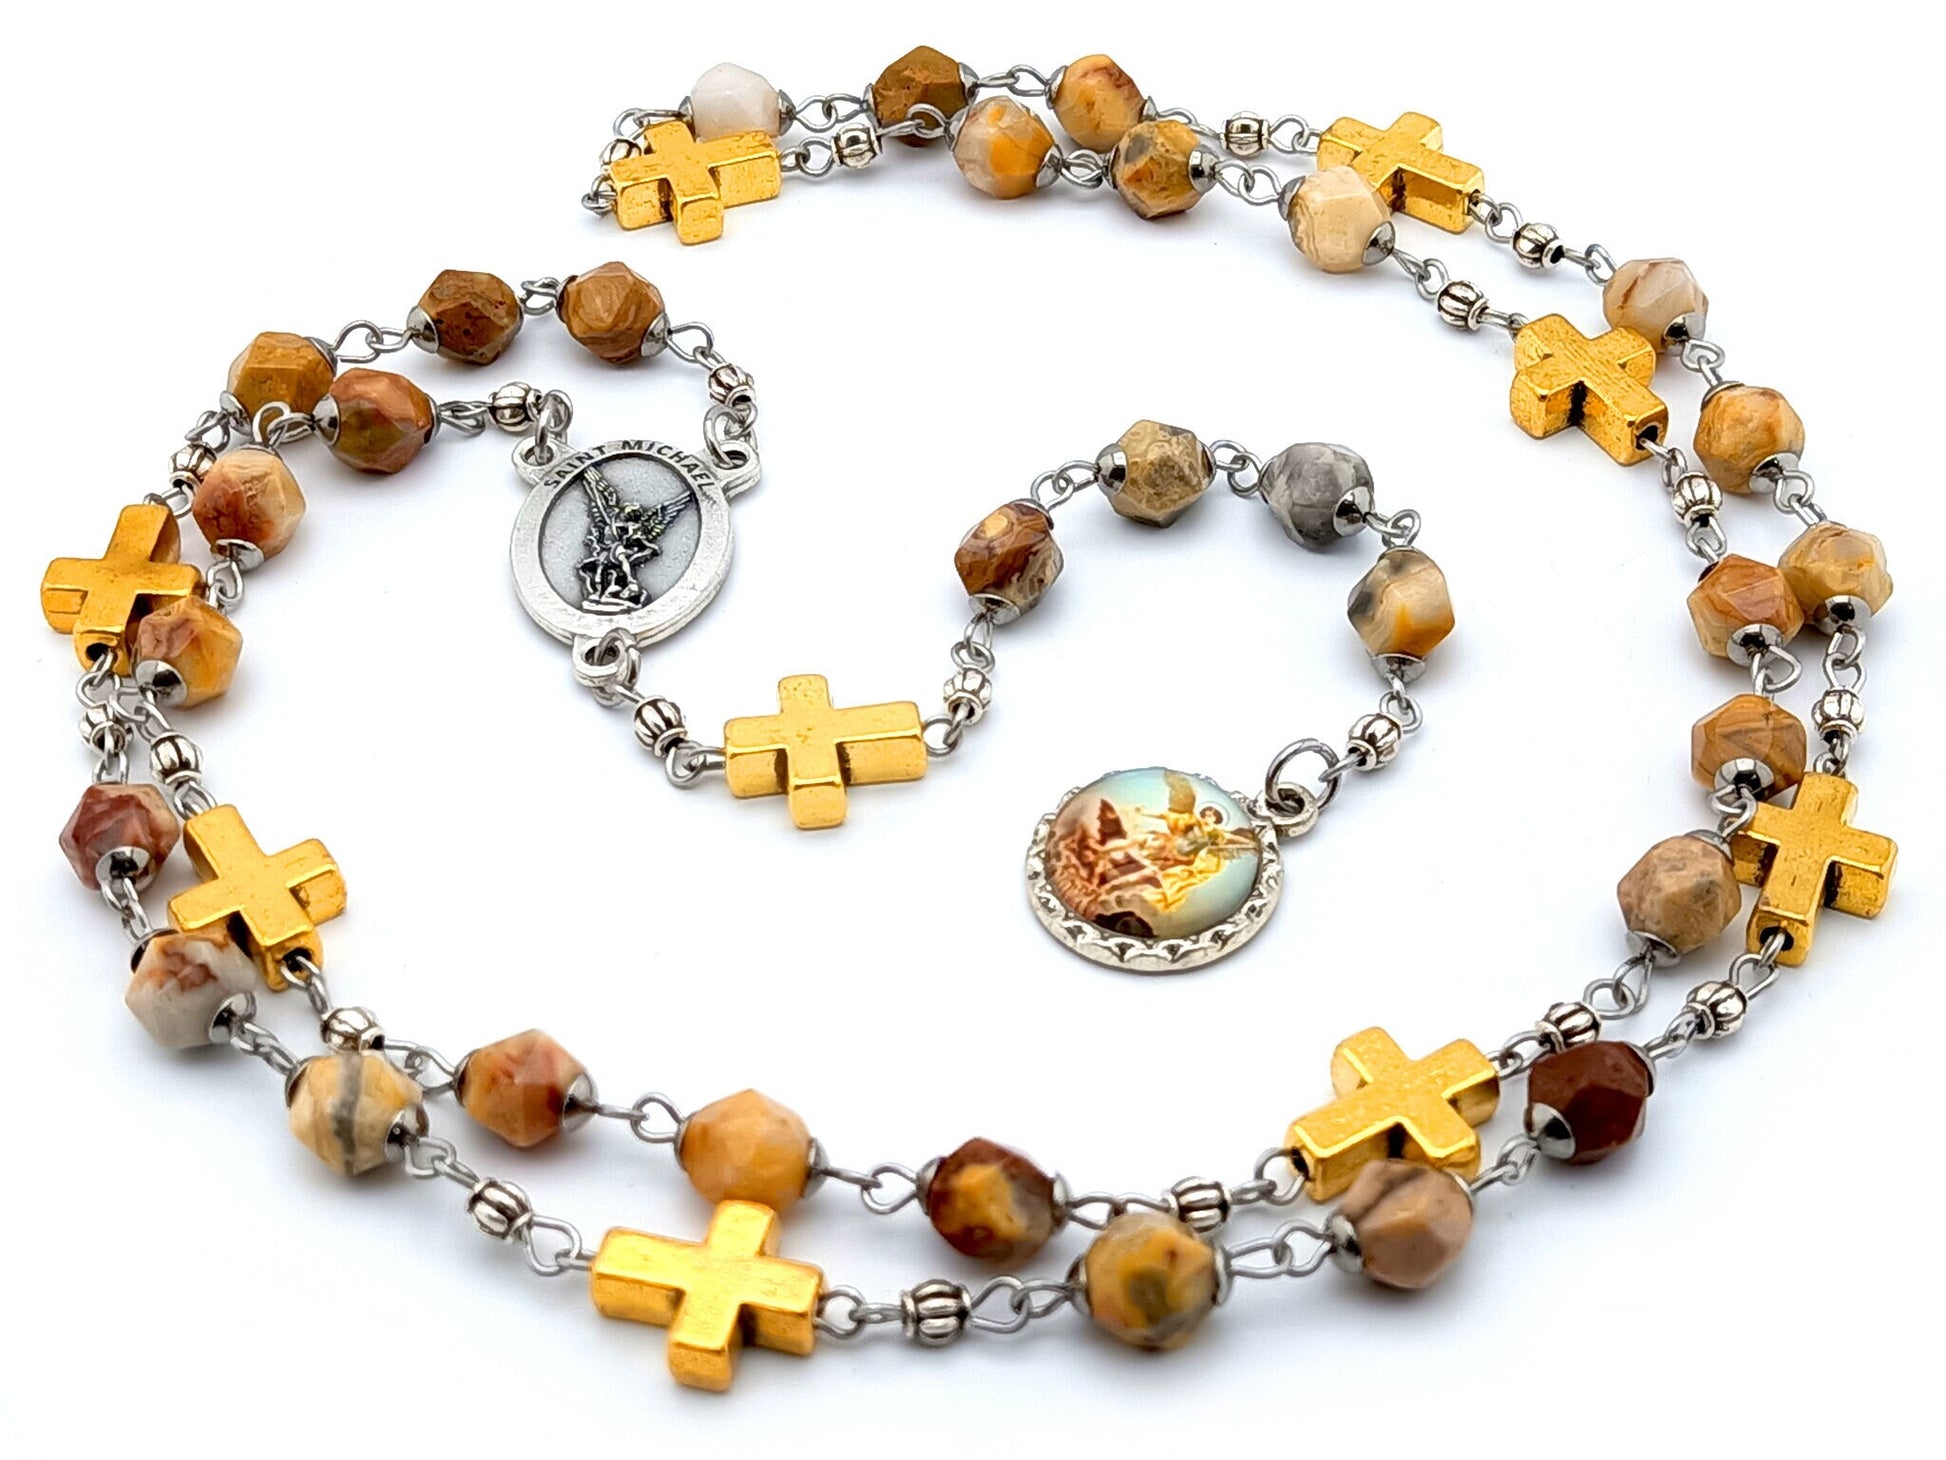 Saint Michael unique rosary beads prayer chaplet with natural faceted gemstone and golden cross beads, silver picture end medal and centre medal.